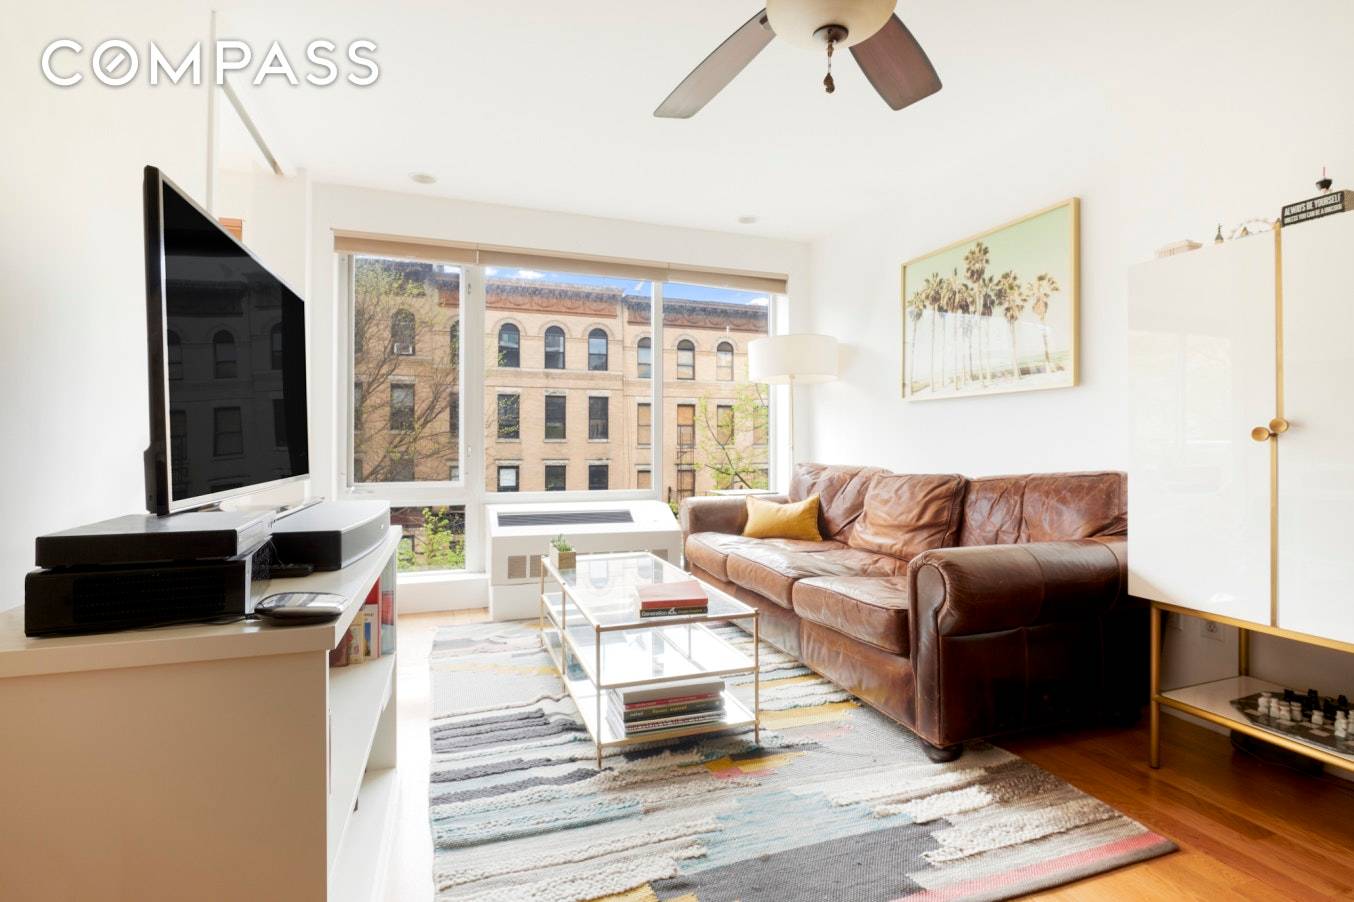 Live near Prospect Park with this well designed one bedroom condo in located in one of Brooklyn s most thriving neighborhoods.